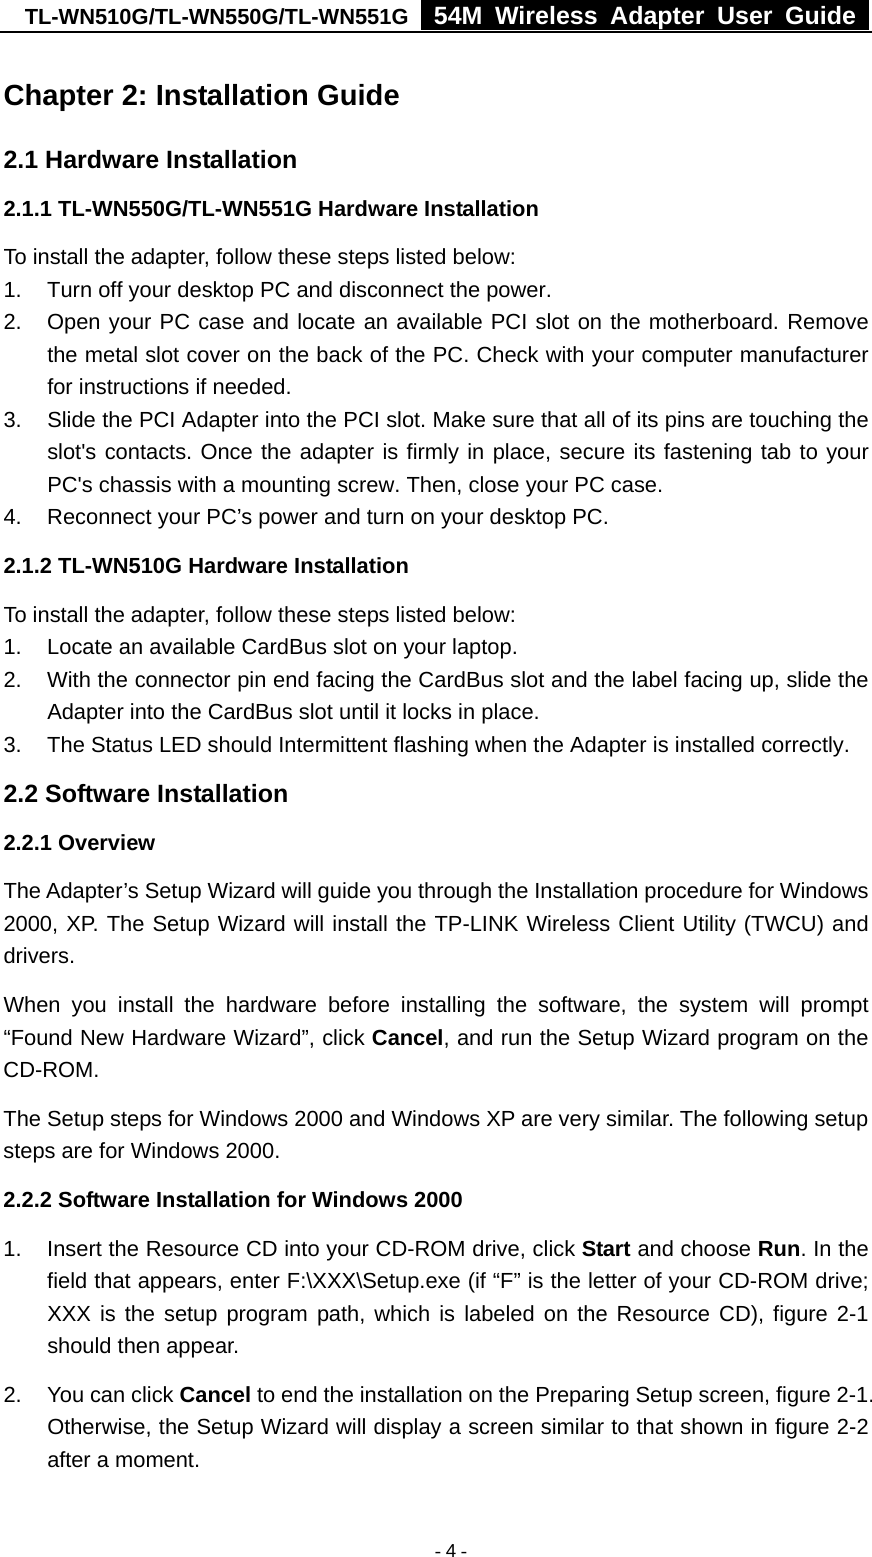 TL-WN510G/TL-WN550G/TL-WN551G  54M Wireless Adapter User Guide   - 4 -Chapter 2: Installation Guide 2.1 Hardware Installation 2.1.1 TL-WN550G/TL-WN551G Hardware Installation To install the adapter, follow these steps listed below: 1.  Turn off your desktop PC and disconnect the power. 2.  Open your PC case and locate an available PCI slot on the motherboard. Remove the metal slot cover on the back of the PC. Check with your computer manufacturer for instructions if needed. 3.  Slide the PCI Adapter into the PCI slot. Make sure that all of its pins are touching the slot&apos;s contacts. Once the adapter is firmly in place, secure its fastening tab to your PC&apos;s chassis with a mounting screw. Then, close your PC case. 4.  Reconnect your PC’s power and turn on your desktop PC. 2.1.2 TL-WN510G Hardware Installation To install the adapter, follow these steps listed below: 1.  Locate an available CardBus slot on your laptop.   2.  With the connector pin end facing the CardBus slot and the label facing up, slide the Adapter into the CardBus slot until it locks in place. 3.  The Status LED should Intermittent flashing when the Adapter is installed correctly. 2.2 Software Installation 2.2.1 Overview The Adapter’s Setup Wizard will guide you through the Installation procedure for Windows 2000, XP. The Setup Wizard will install the TP-LINK Wireless Client Utility (TWCU) and drivers. When you install the hardware before installing the software, the system will prompt “Found New Hardware Wizard”, click Cancel, and run the Setup Wizard program on the CD-ROM.  The Setup steps for Windows 2000 and Windows XP are very similar. The following setup steps are for Windows 2000. 2.2.2 Software Installation for Windows 2000 1.  Insert the Resource CD into your CD-ROM drive, click Start and choose Run. In the field that appears, enter F:\XXX\Setup.exe (if “F” is the letter of your CD-ROM drive; XXX is the setup program path, which is labeled on the Resource CD), figure 2-1 should then appear. 2.  You can click Cancel to end the installation on the Preparing Setup screen, figure 2-1. Otherwise, the Setup Wizard will display a screen similar to that shown in figure 2-2 after a moment. 